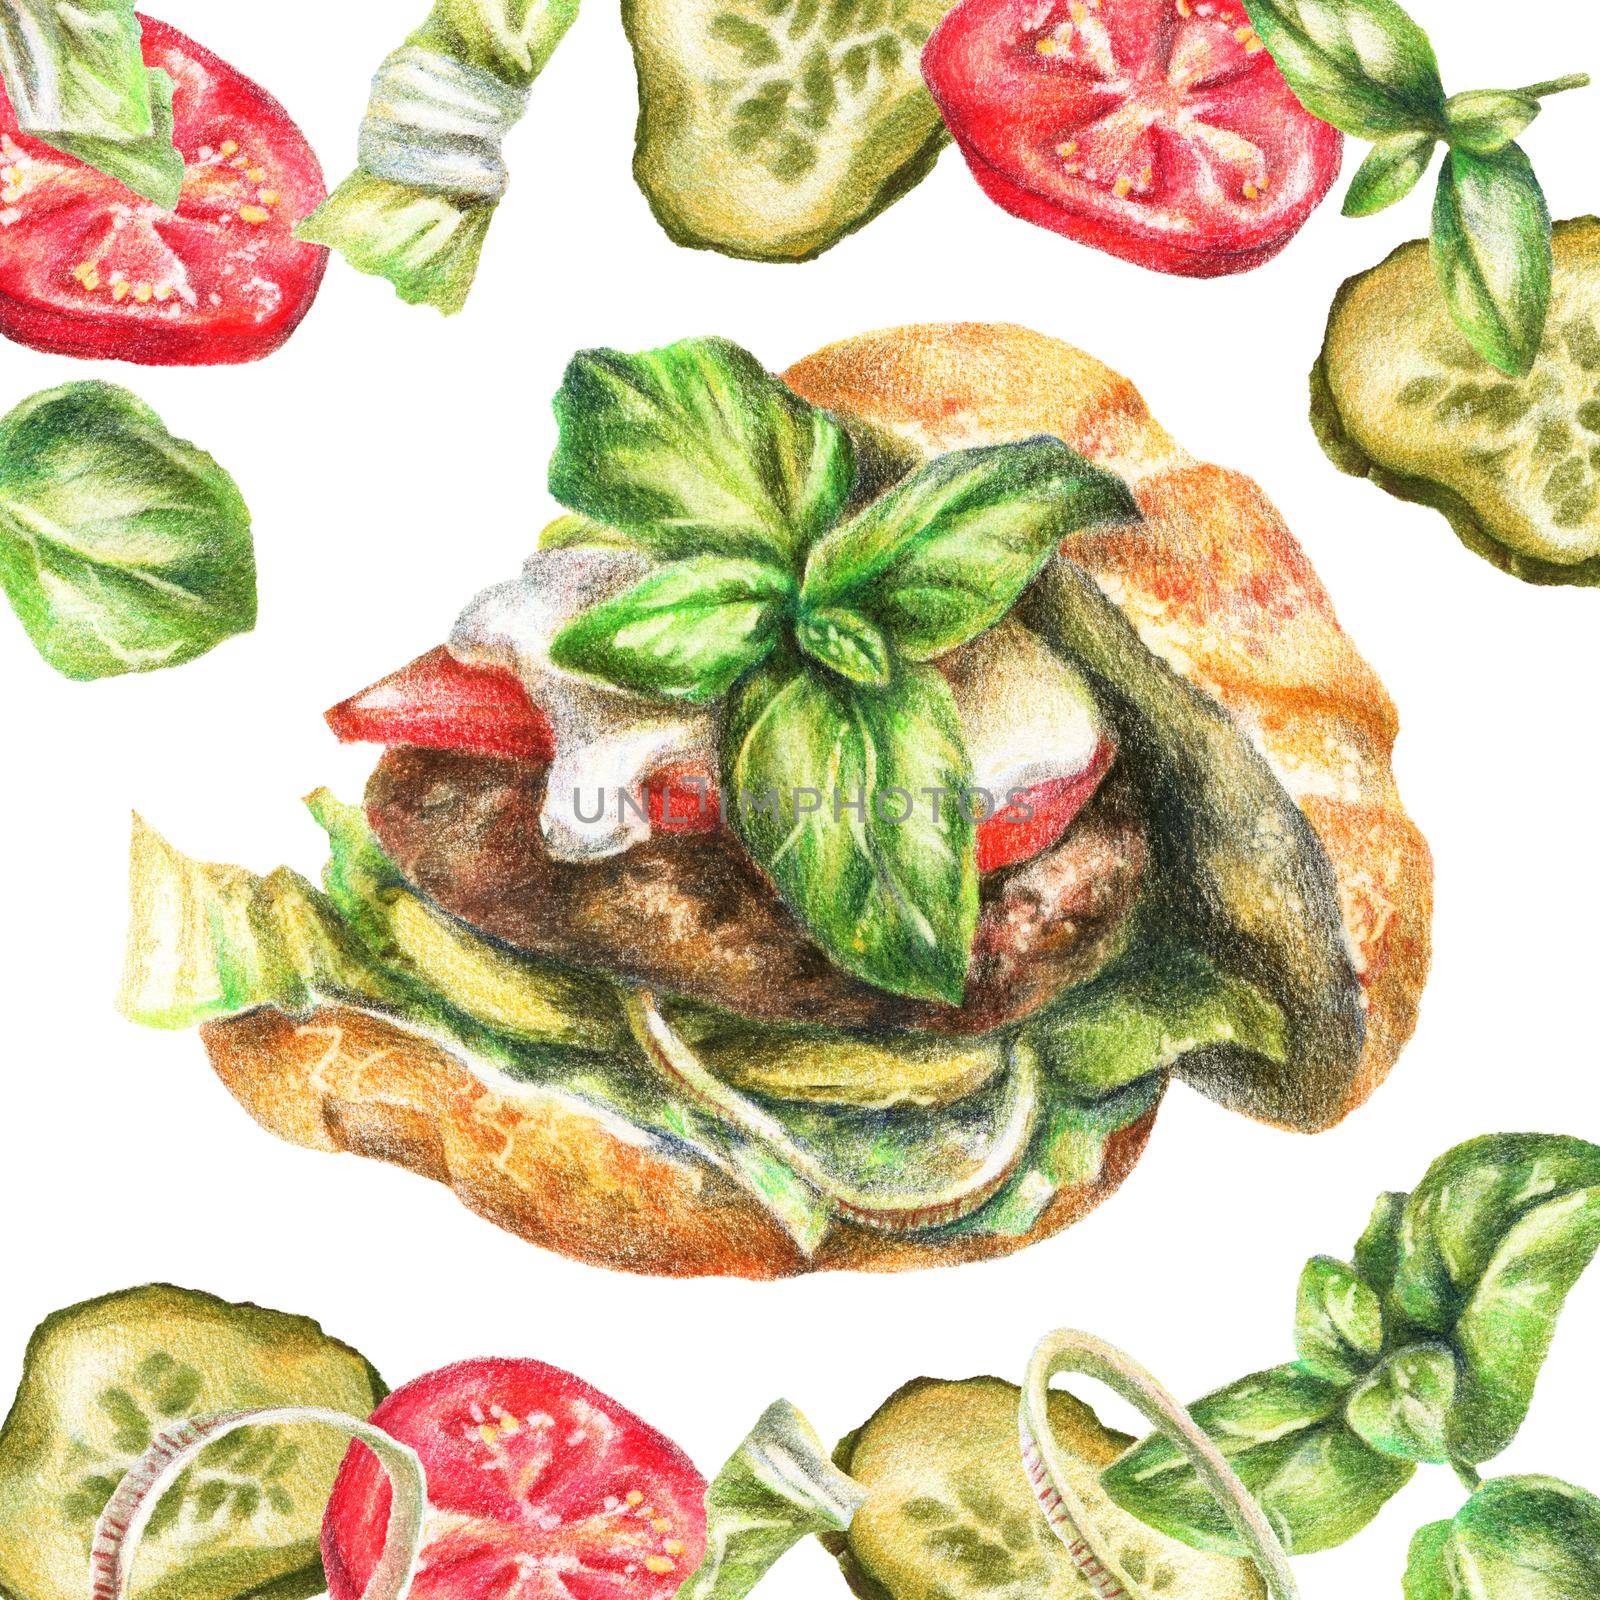 Color pencils realistic food illustration - burger, tomato, pickle, onion, basil, lettuce leaves. Hand-drawn objects on white background.